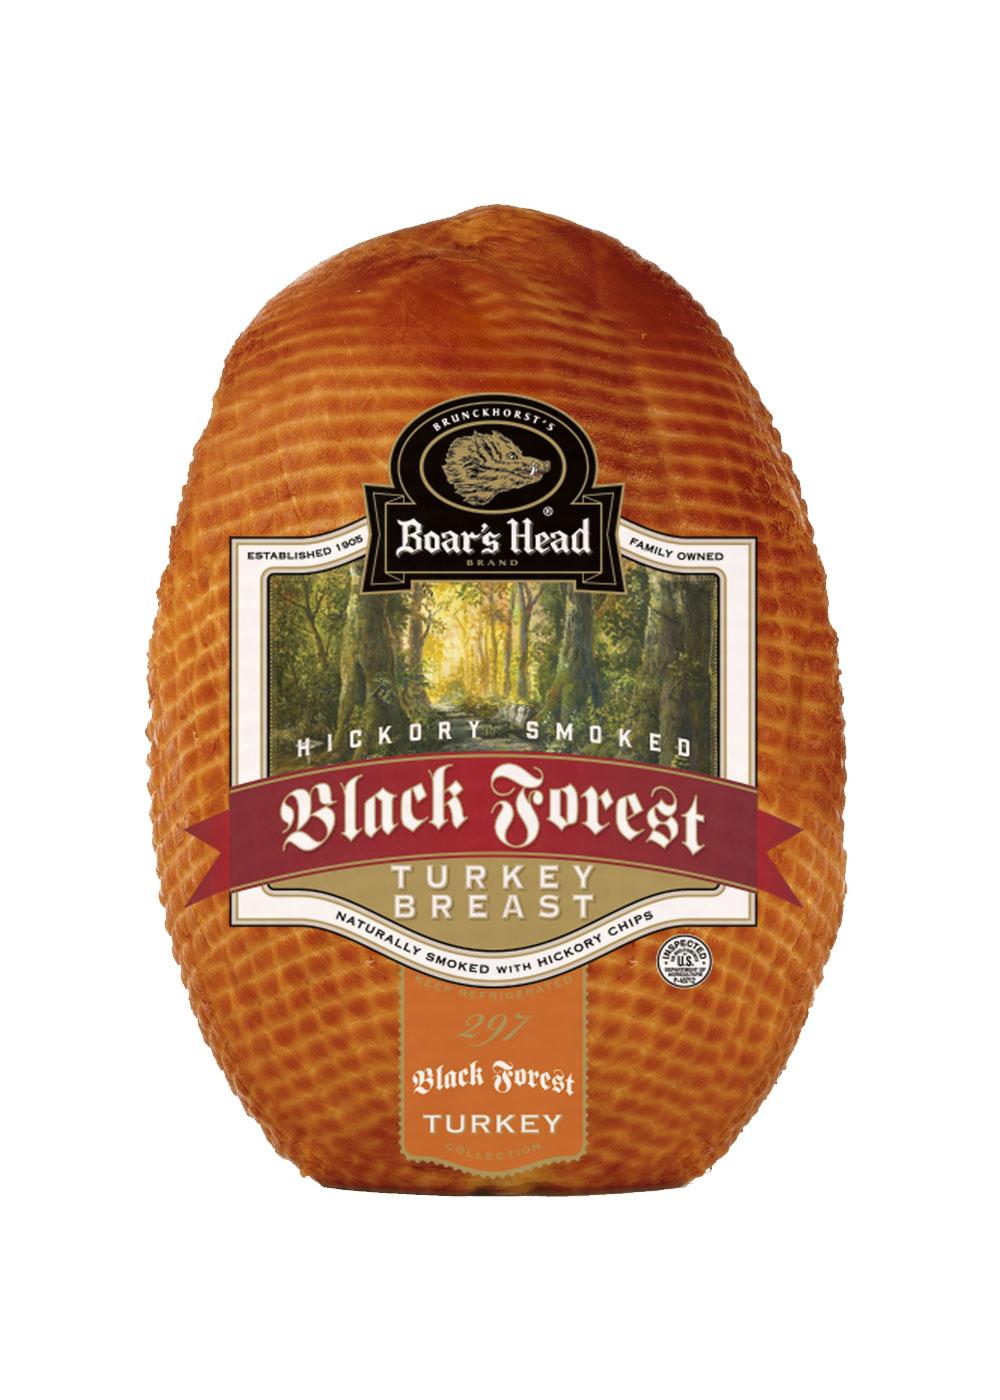 Boar's Head Hickory Smoked Black Forest Turkey Breast, Sliced; image 1 of 2